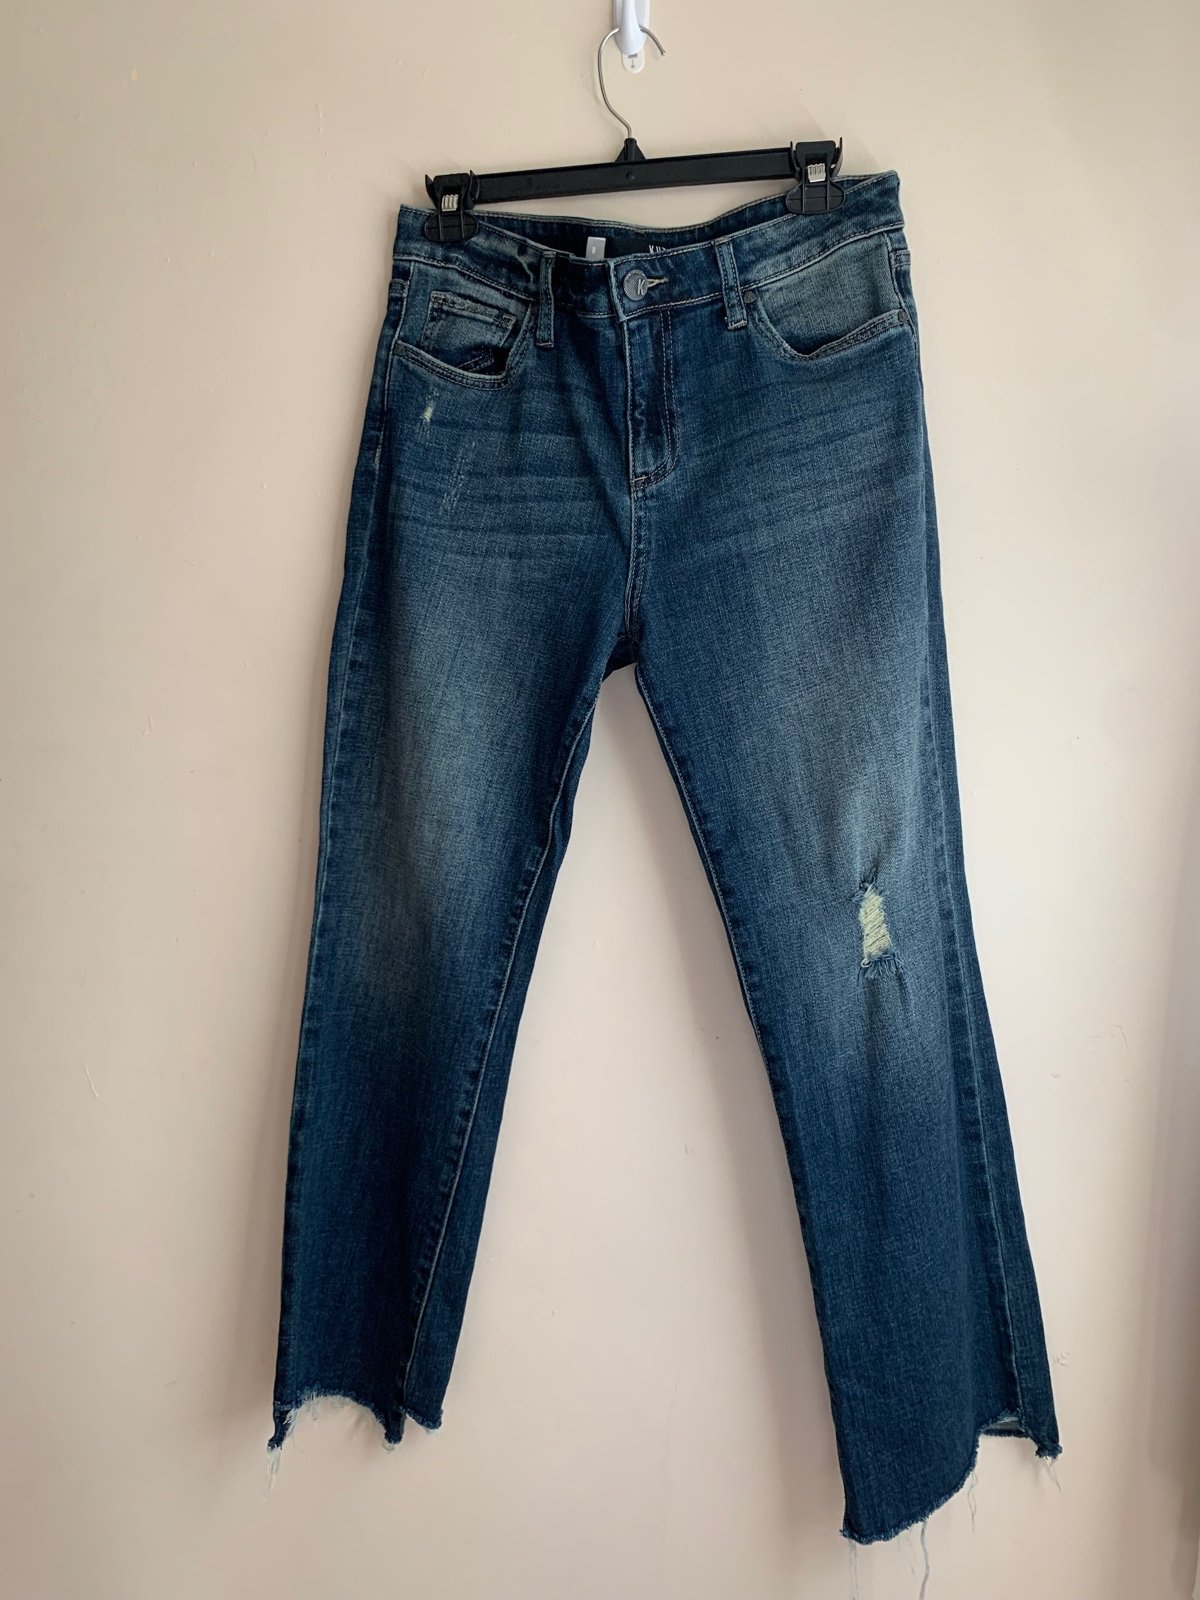 the Lowest price Kut from the kloth jeans size 8 je5hPd